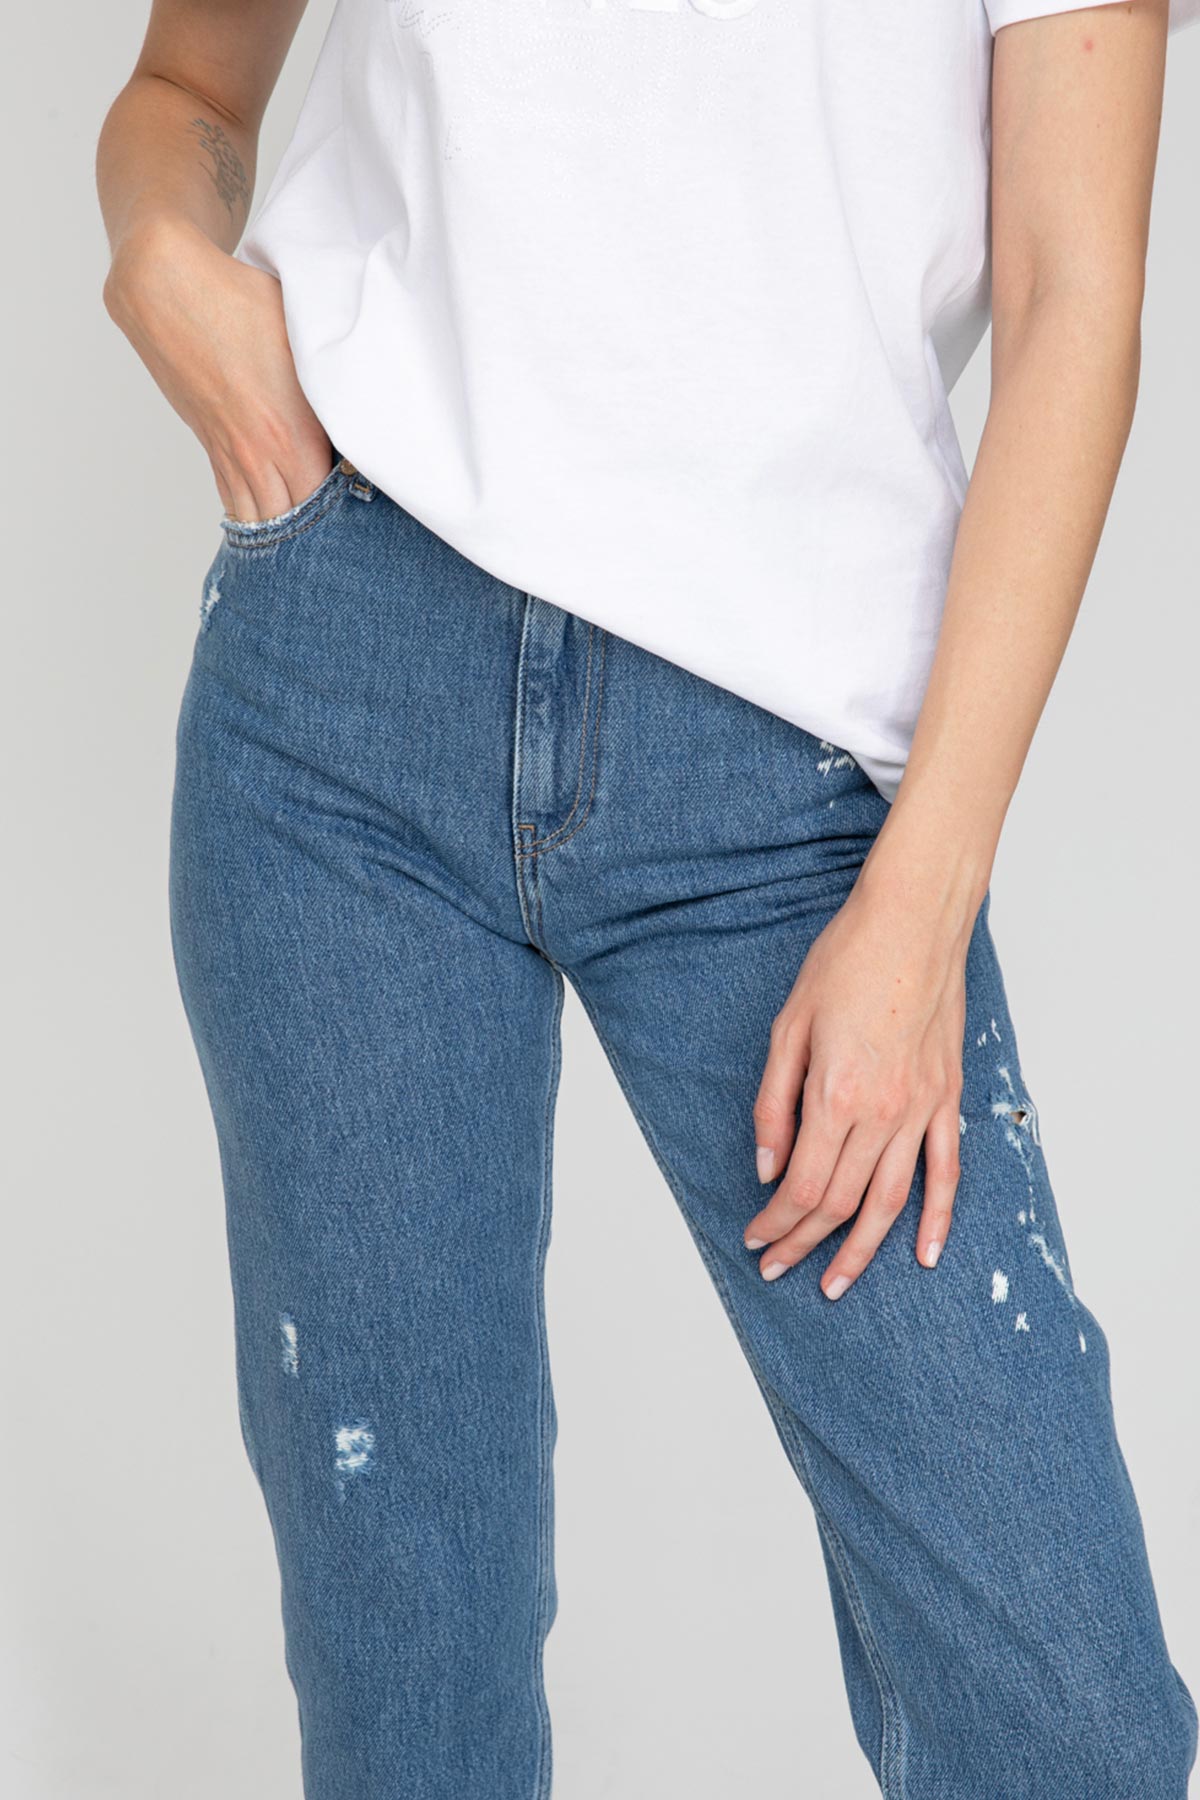 Replay Kıley High Waist Tapered Fit Jeans-Libas Trendy Fashion Store